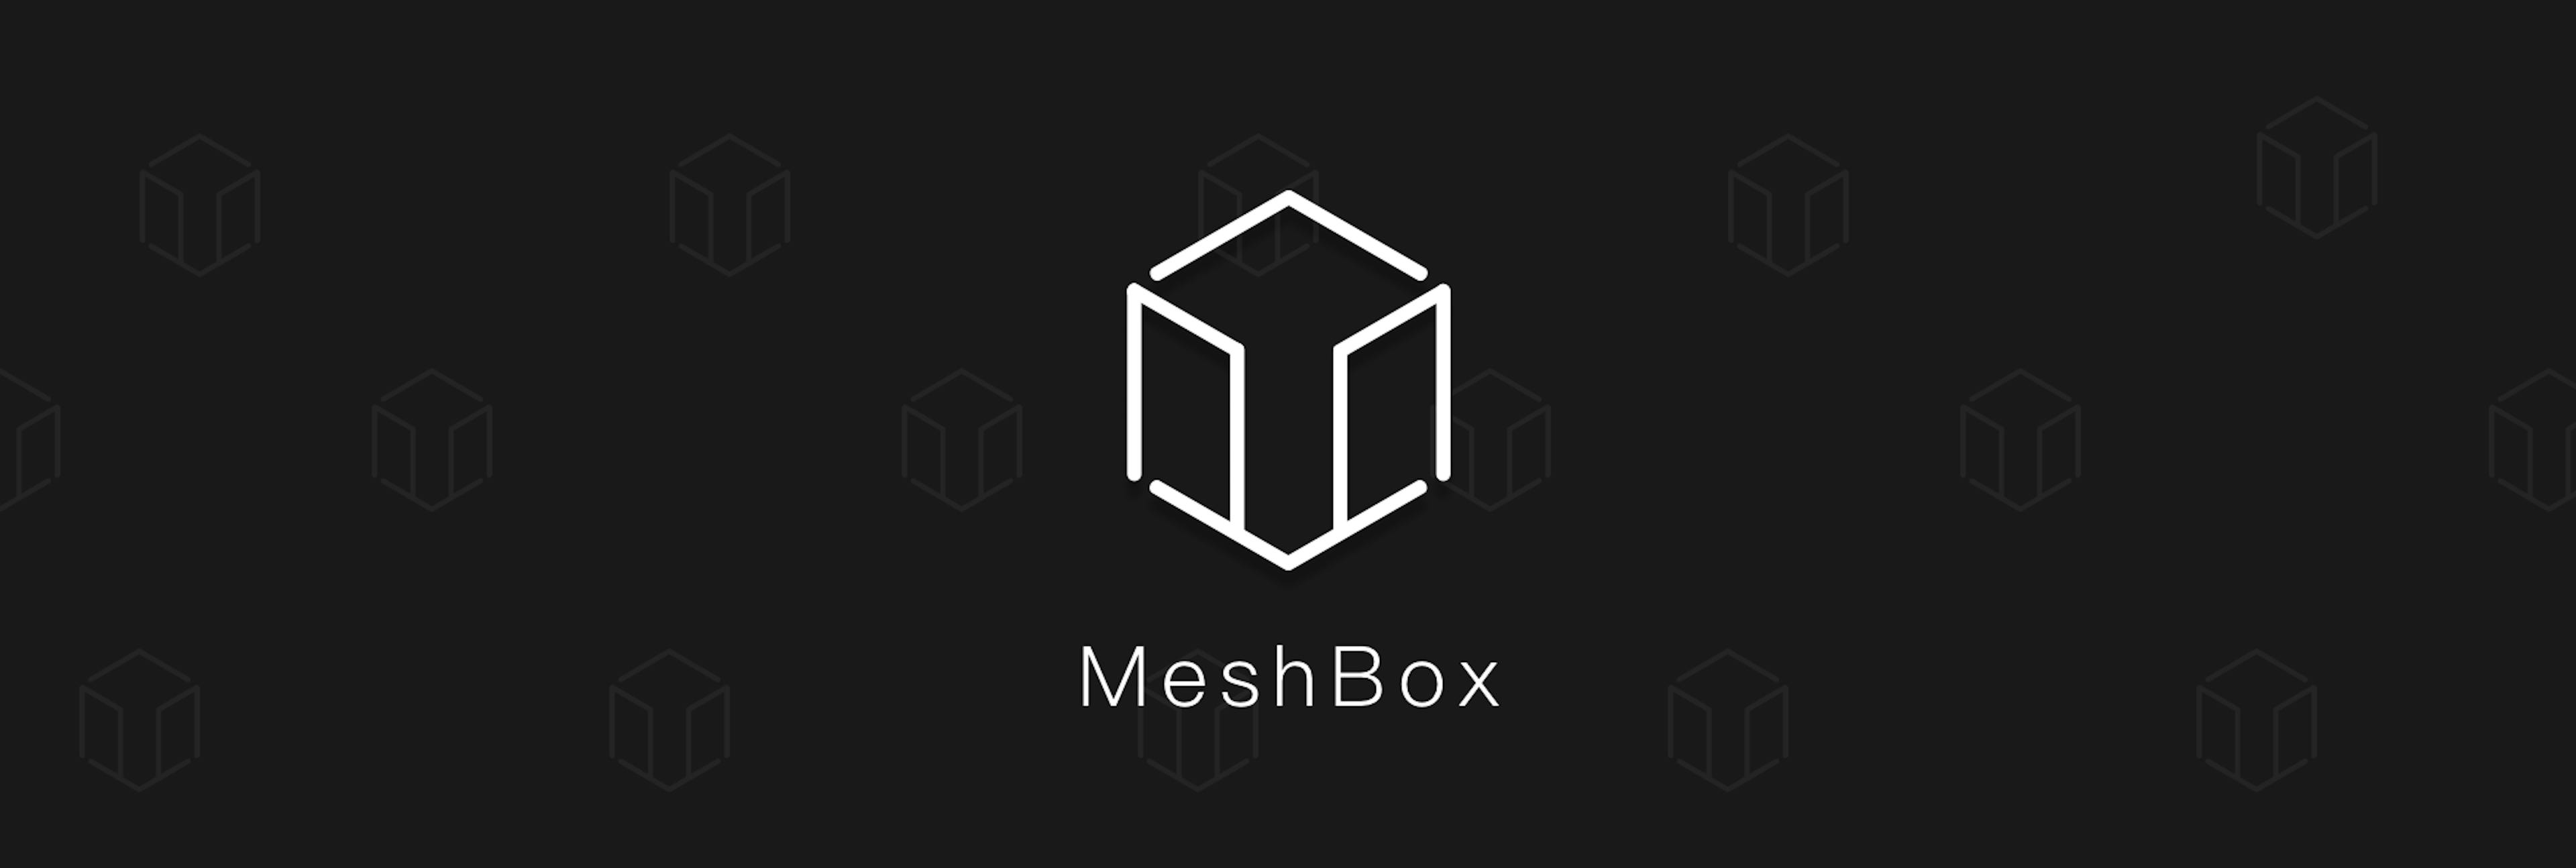 featured image - Distributed HUAWEI and CISCO on the next generation of Internet: MeshBox